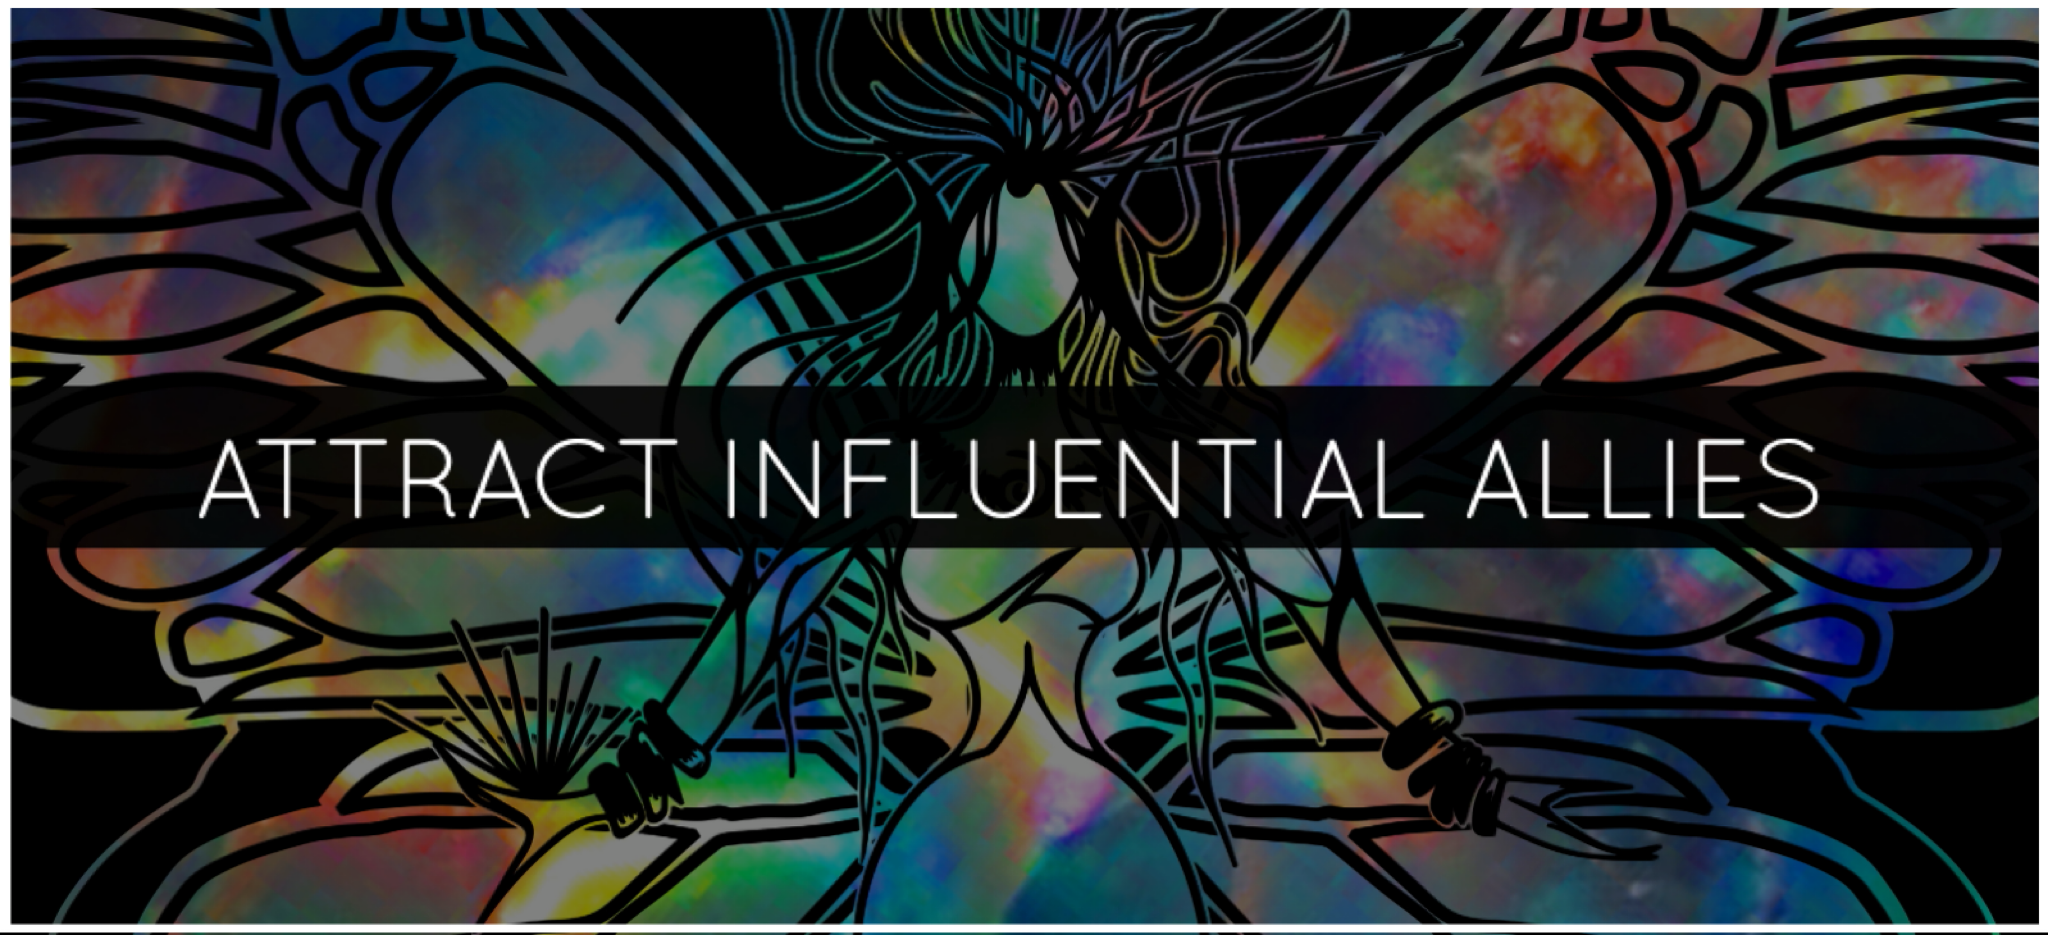 ATTRACT INFLUENTIAL ALLIES